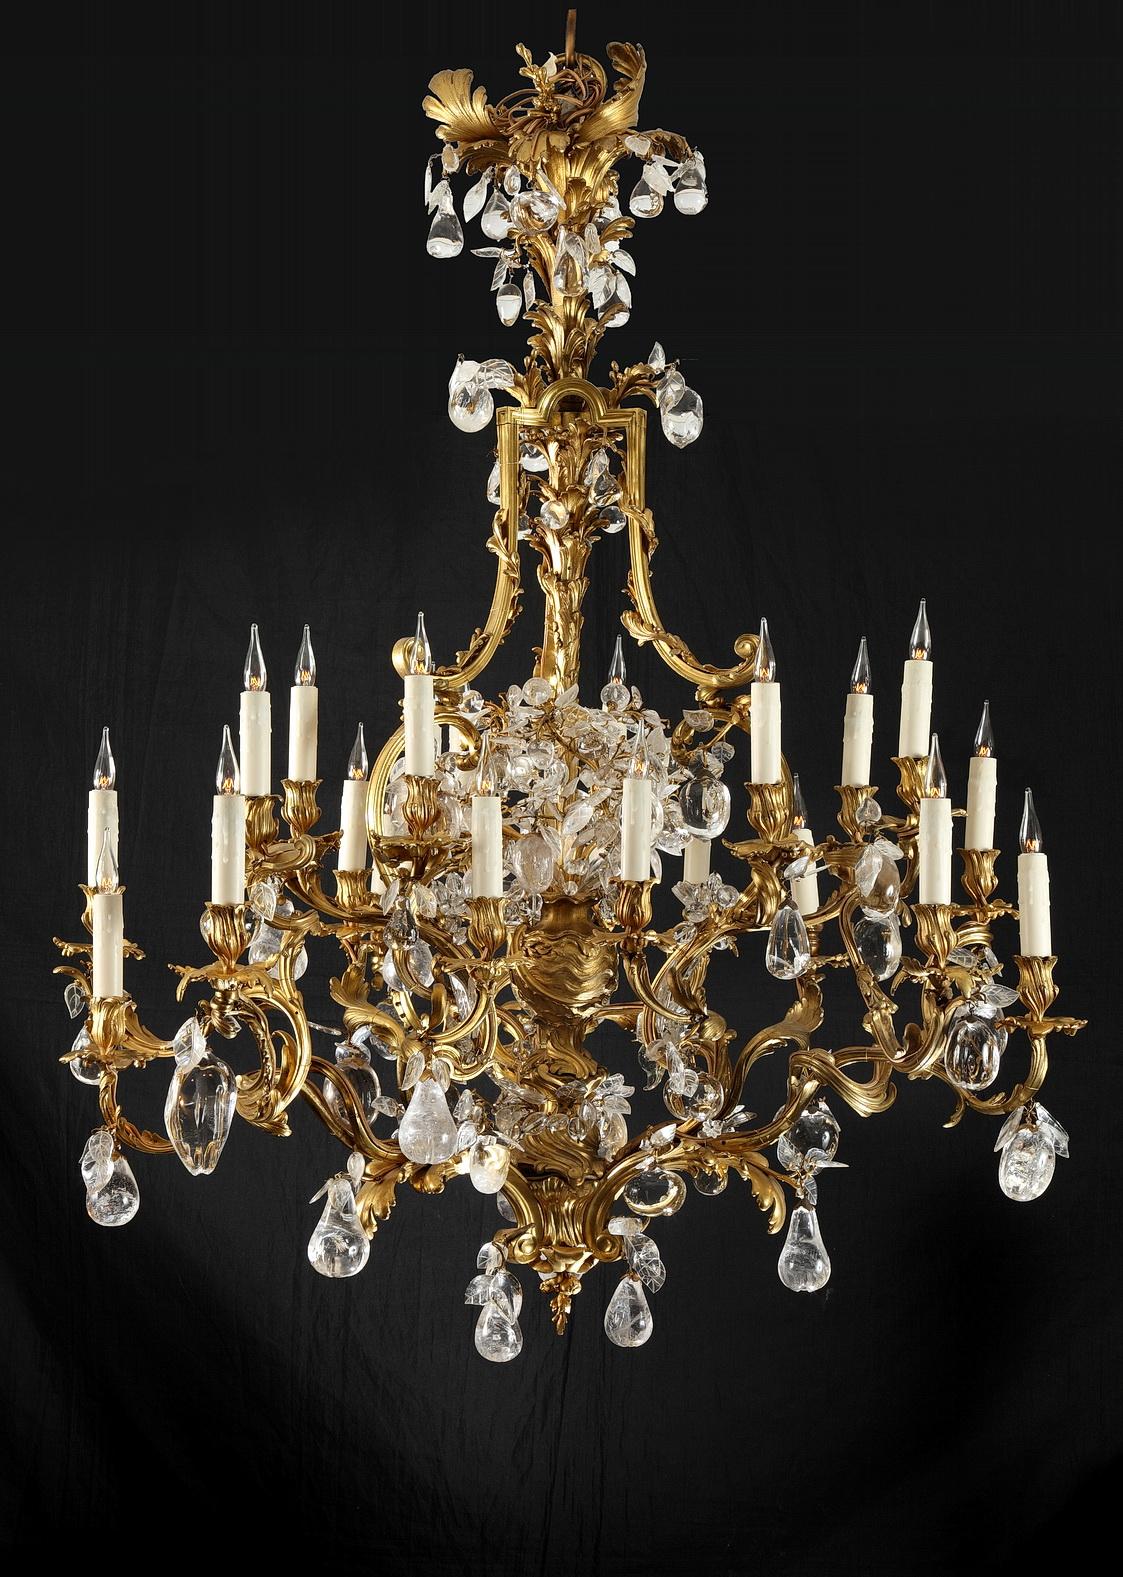 Exceptional ormolu and rock crystal twenty-four-light chandelier attributed to L. Messagé. Made of cage form, the central stem cast with bulrush and a fruit-filled vase, issuing twenty-four scrolled candlearms hung with rock-crystal fruit-form drops